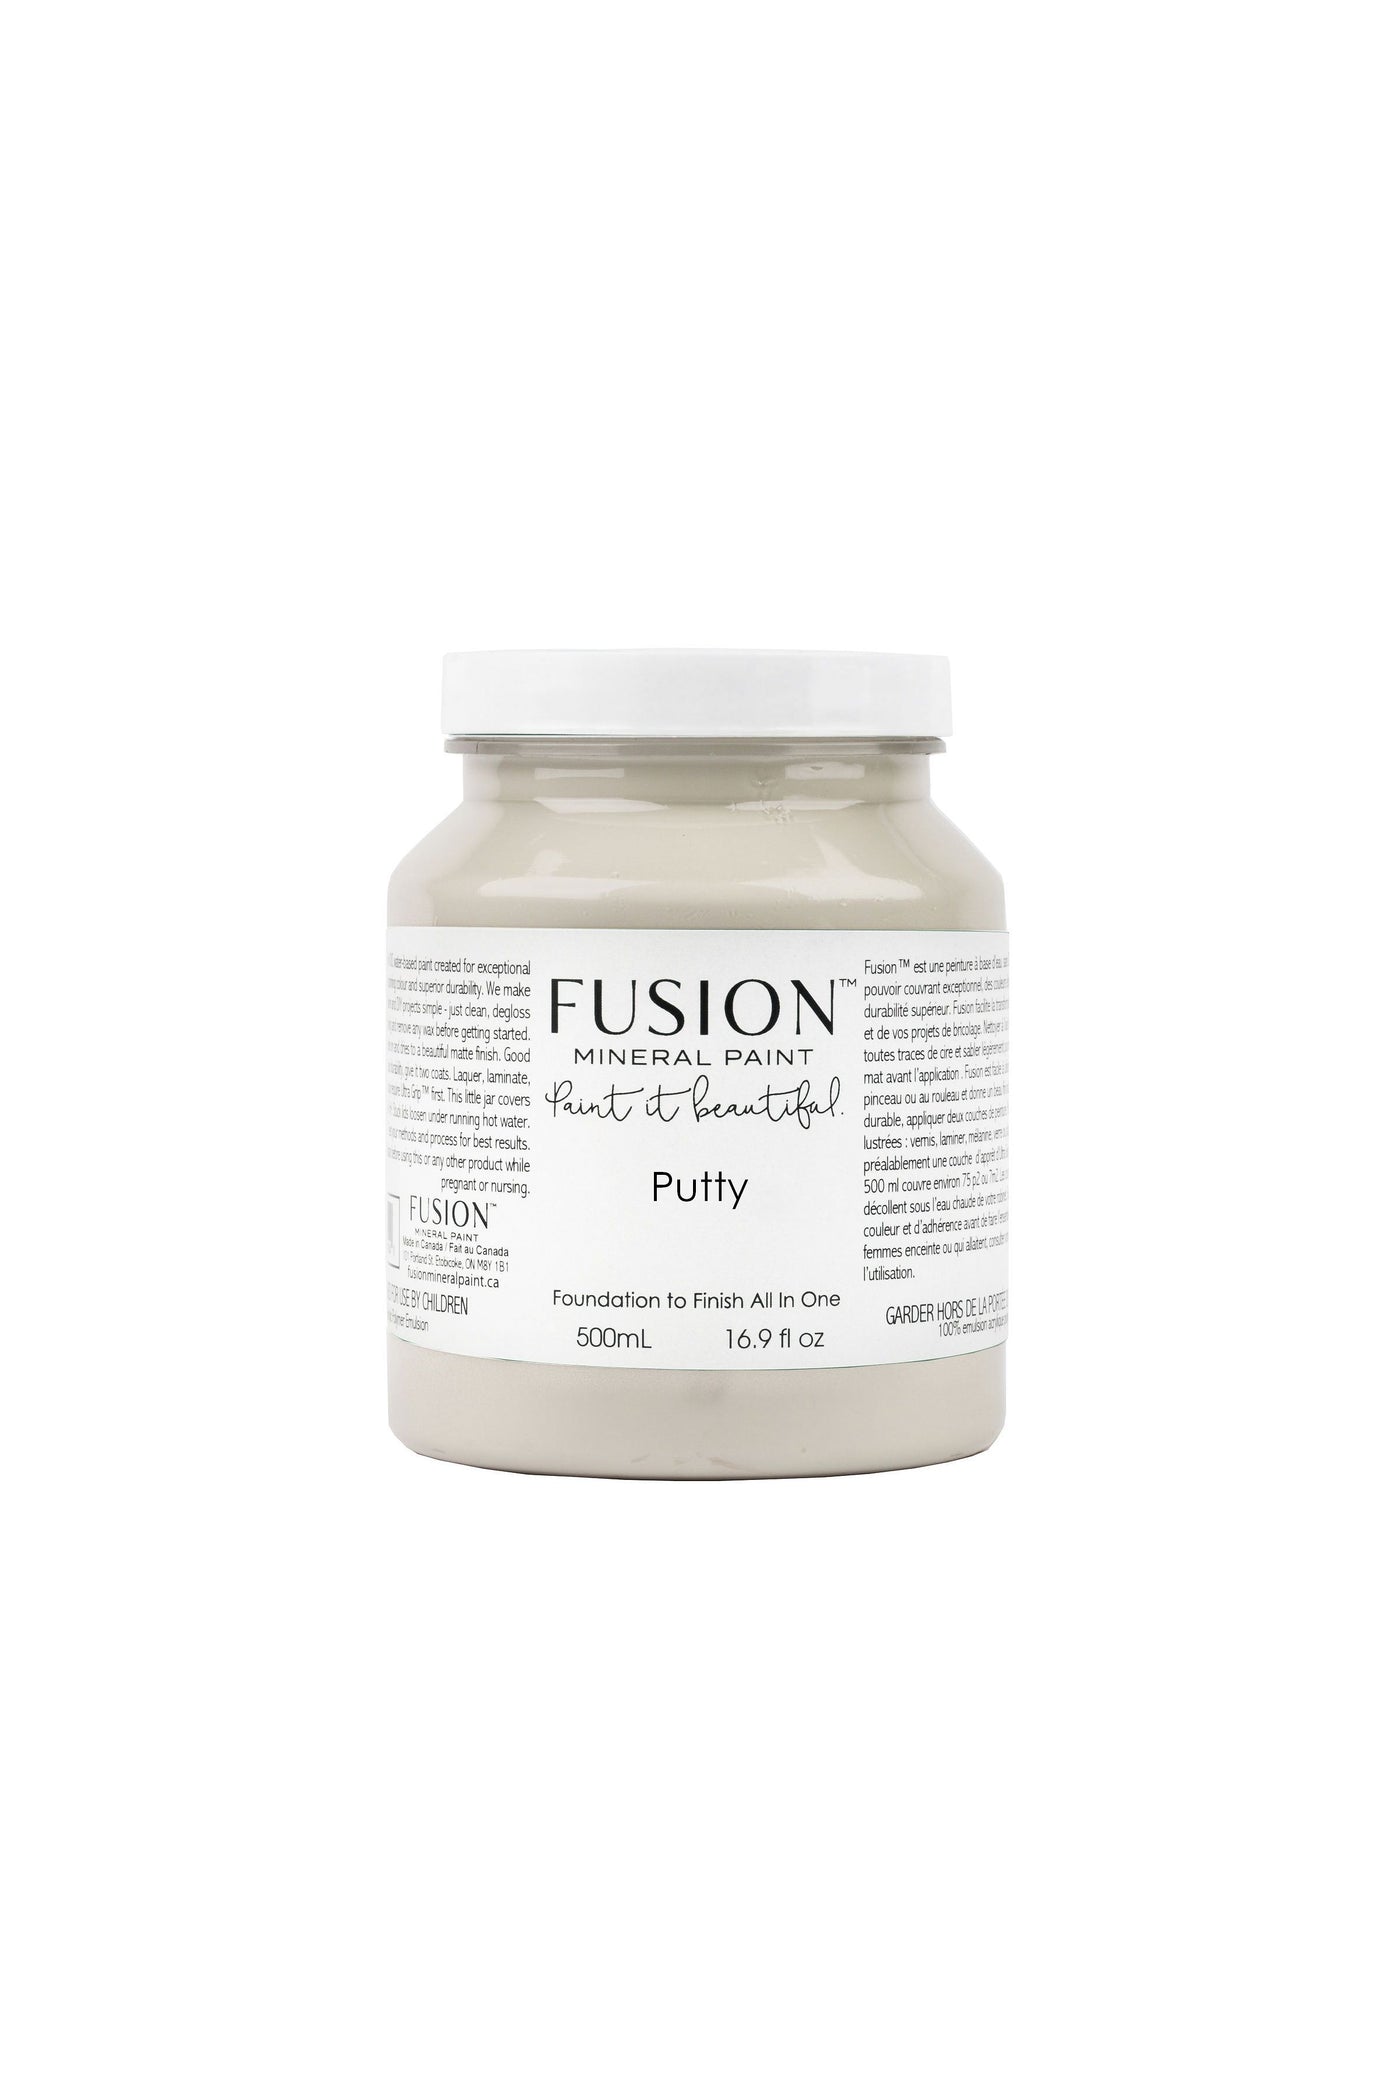 Fusion Mineral Paint - PUTTY pale neutral beige-grey 500ml